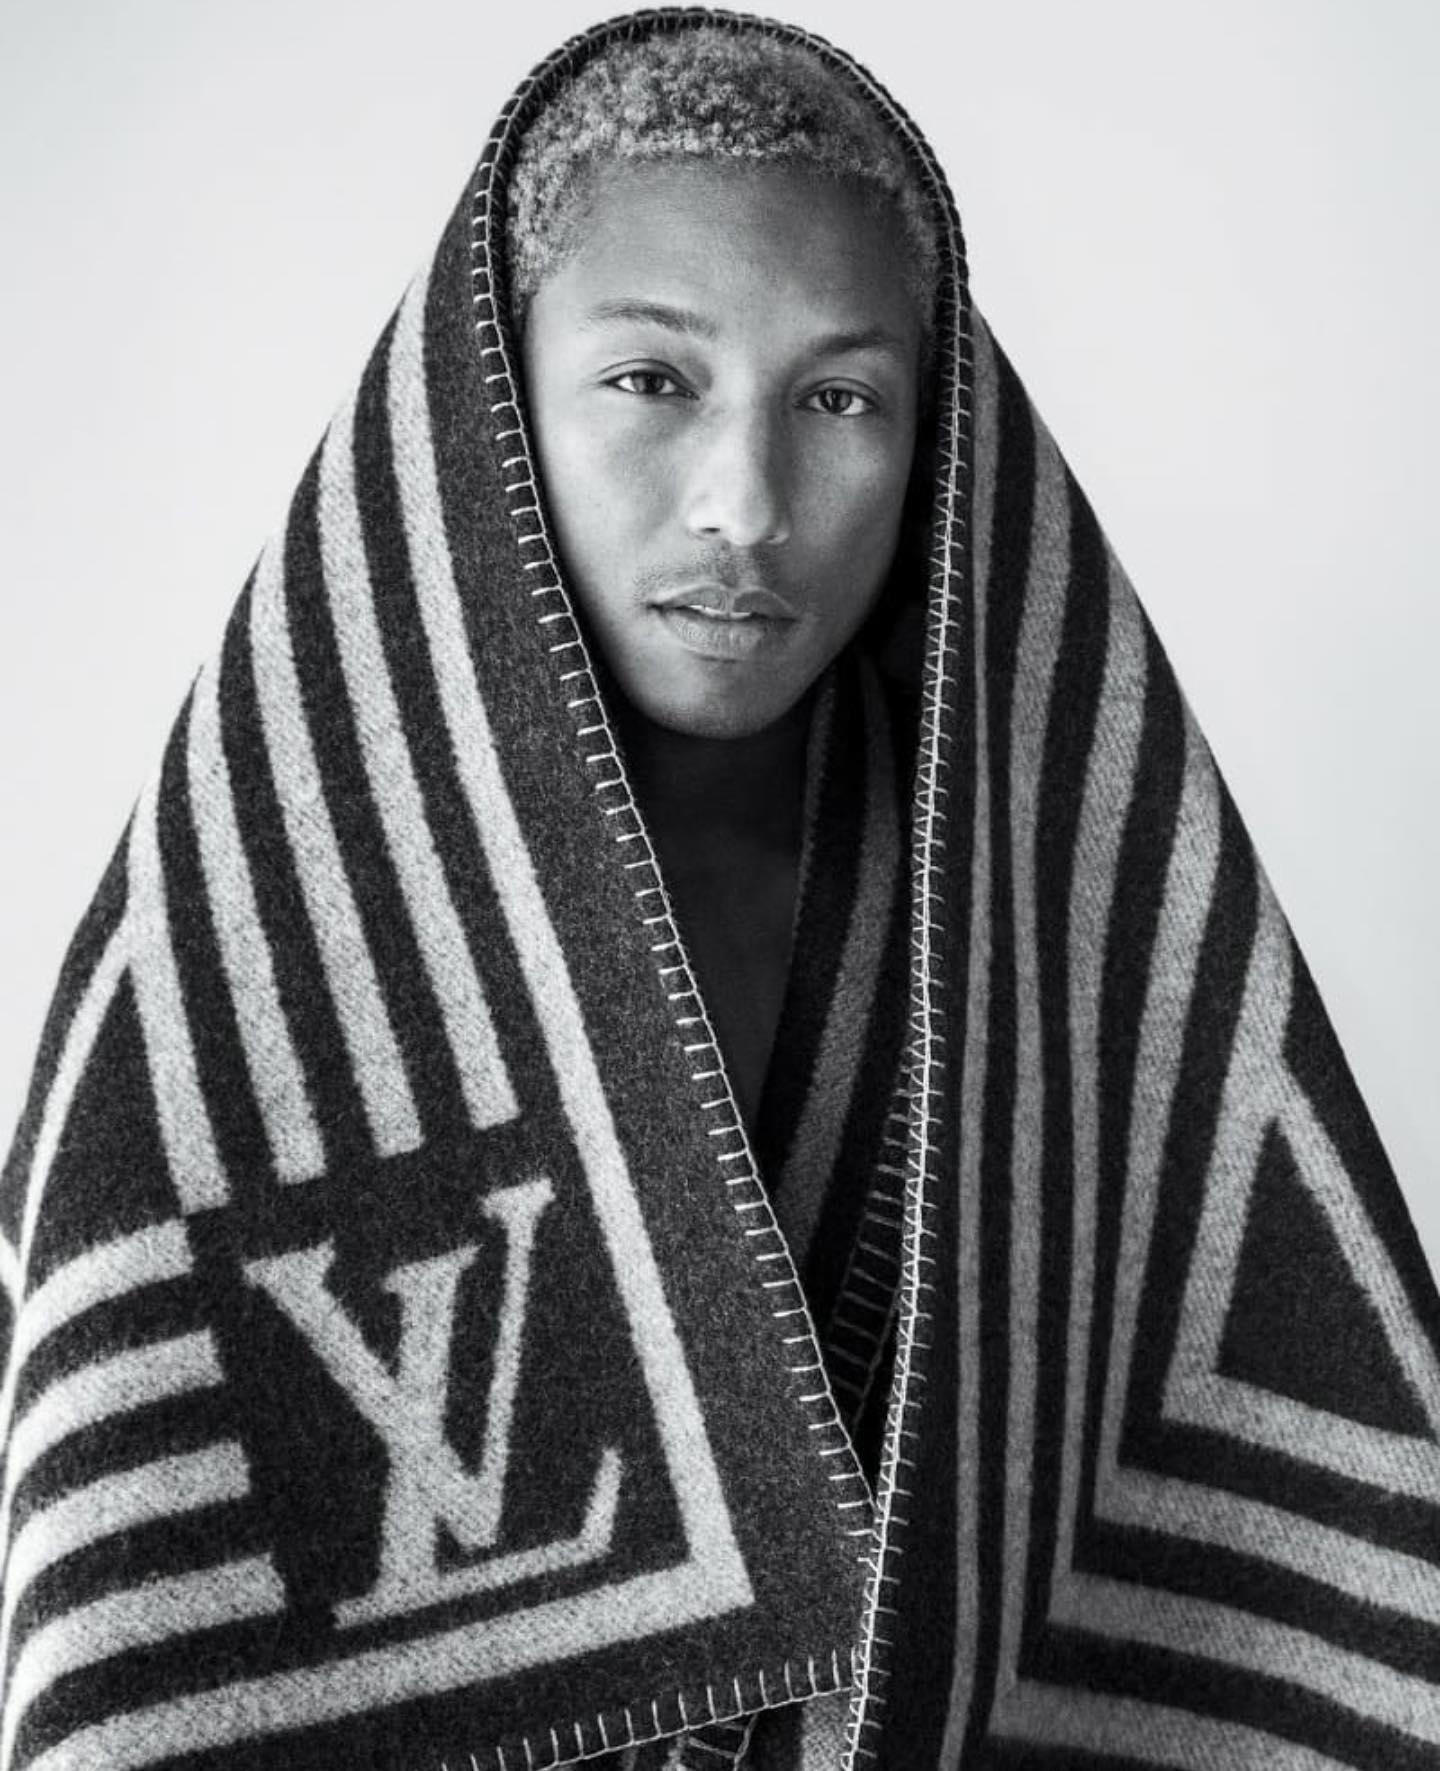 image  1 Louis Vuitton is delighted to welcome Pharrell Williams as its new Men’s Creative Director